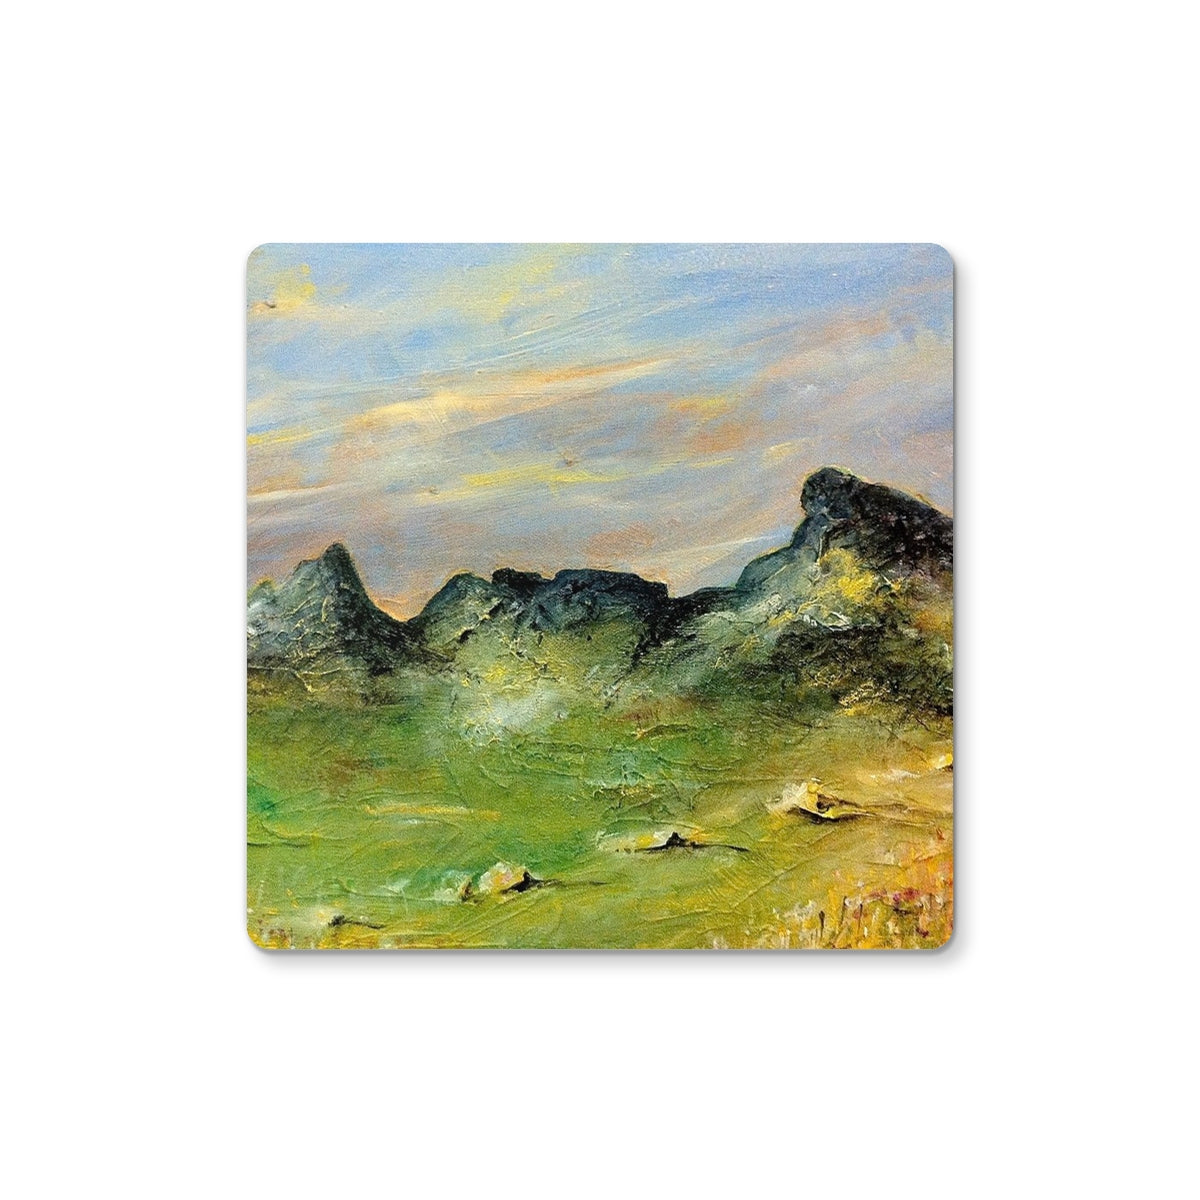 The Cobbler Art Gifts Coaster-Coasters-Scottish Lochs & Mountains Art Gallery-2 Coasters-Paintings, Prints, Homeware, Art Gifts From Scotland By Scottish Artist Kevin Hunter